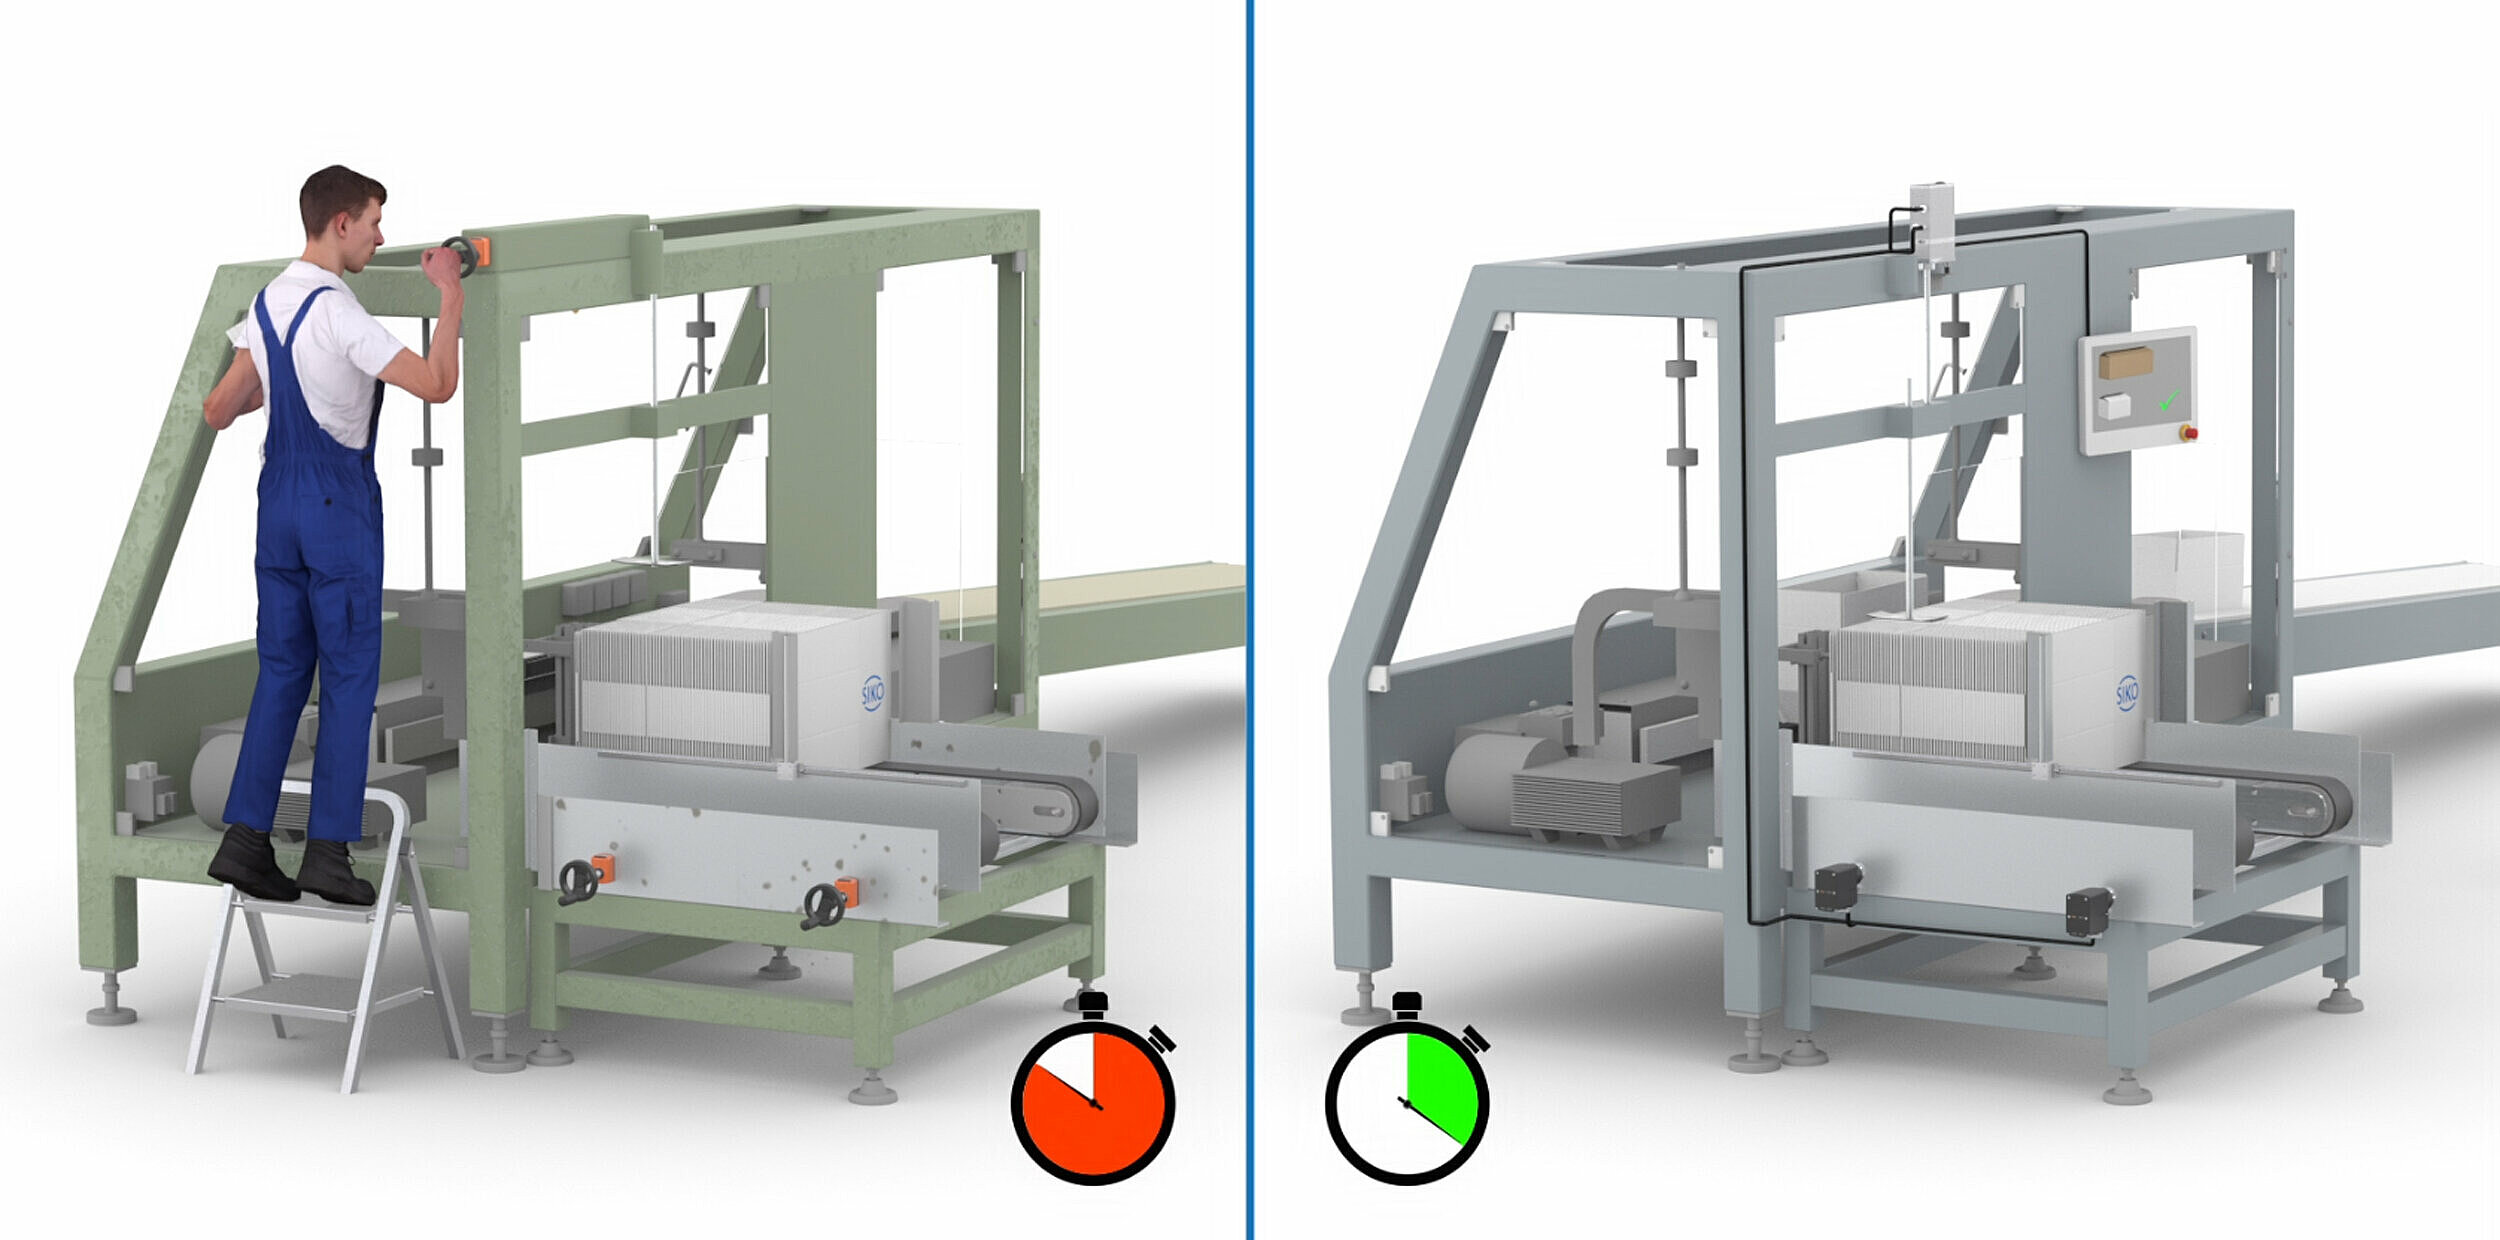 Presentation of two packaging machines, one with manual format adjustment, one optimized with retrofit components